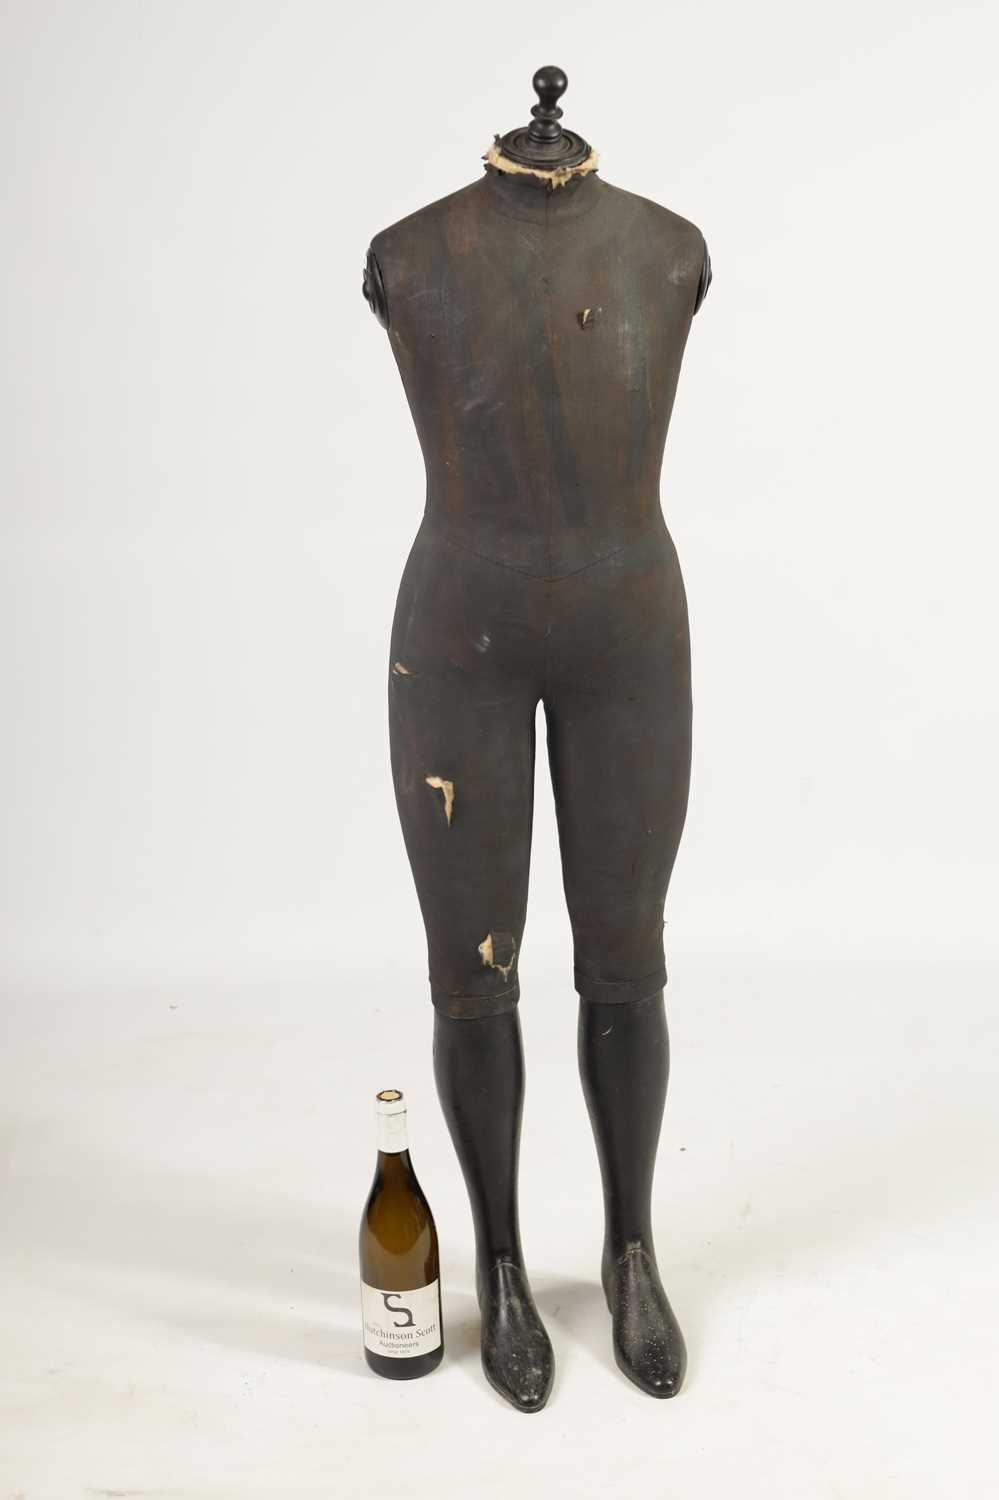 AN EARLY 20TH CENTURY FRENCH RETICULATED MANNEQUIN ATTRIBUTED TO STOCKMAN - Image 2 of 8